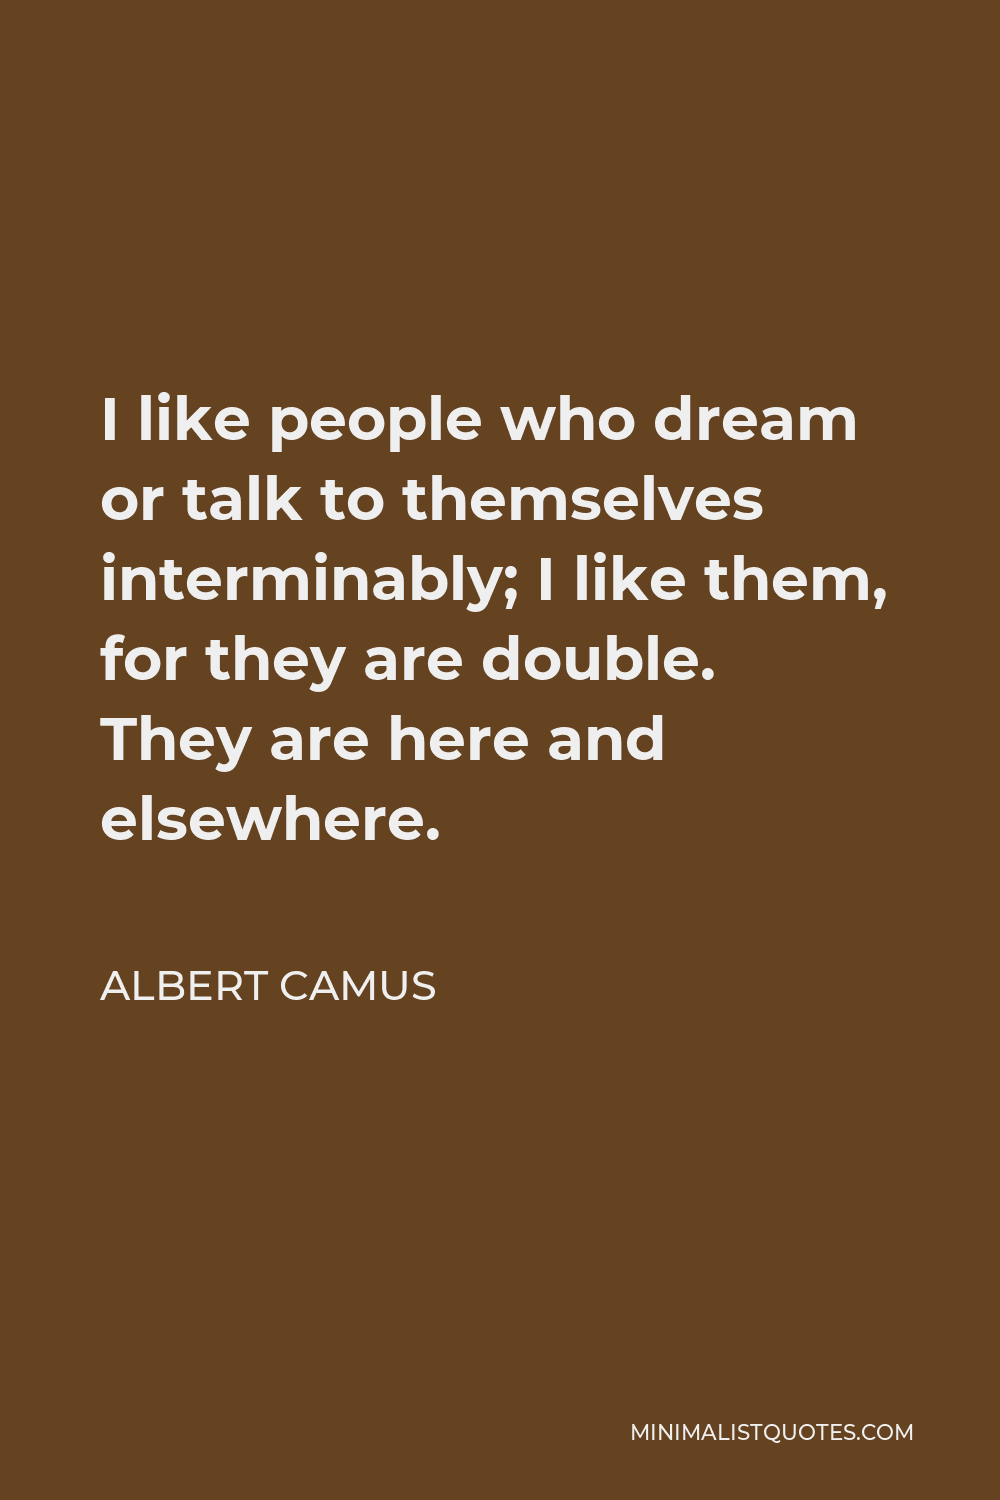 Albert Camus Quote - I like people who dream or talk to themselves interminably; I like them, for they are double. They are here and elsewhere.